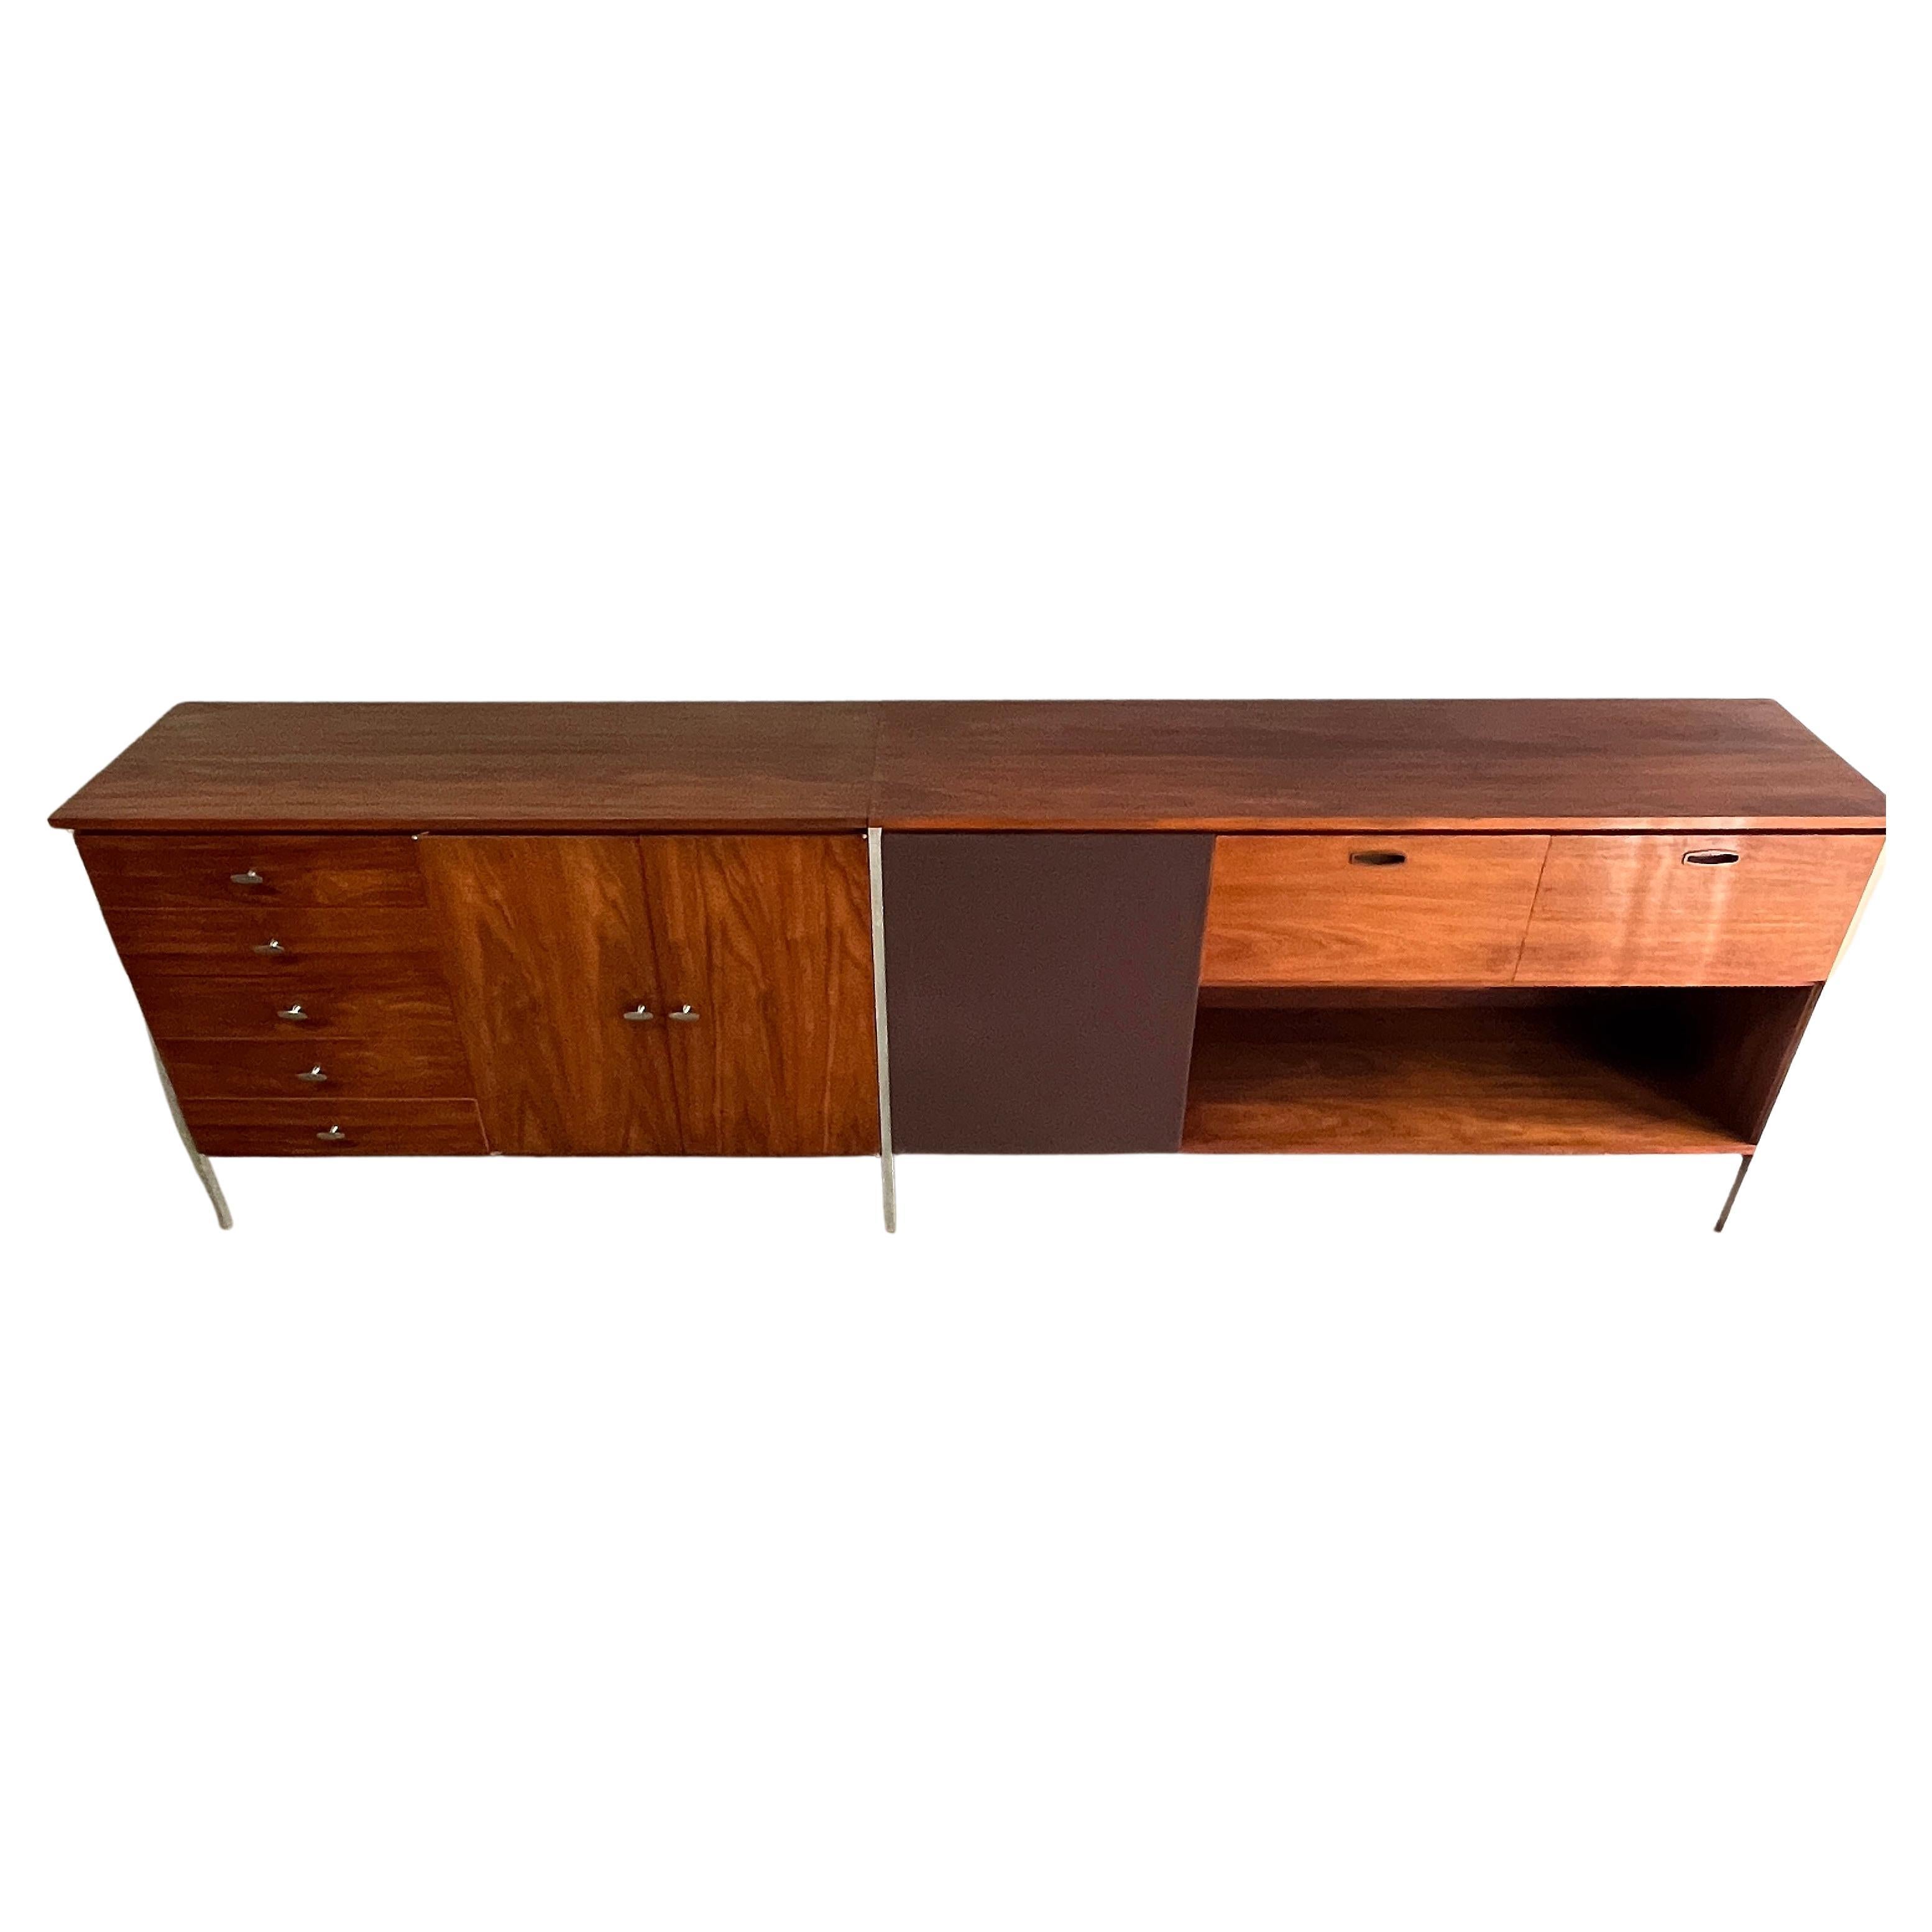 For your consideration is this monumental credenza or sideboard designed by Paul McCobb for the Connoisseur Collection. Extremely rare unit comprised of 5 drawers, one adjustable shelf concealed in a two door cabinet, one speaker section with pull